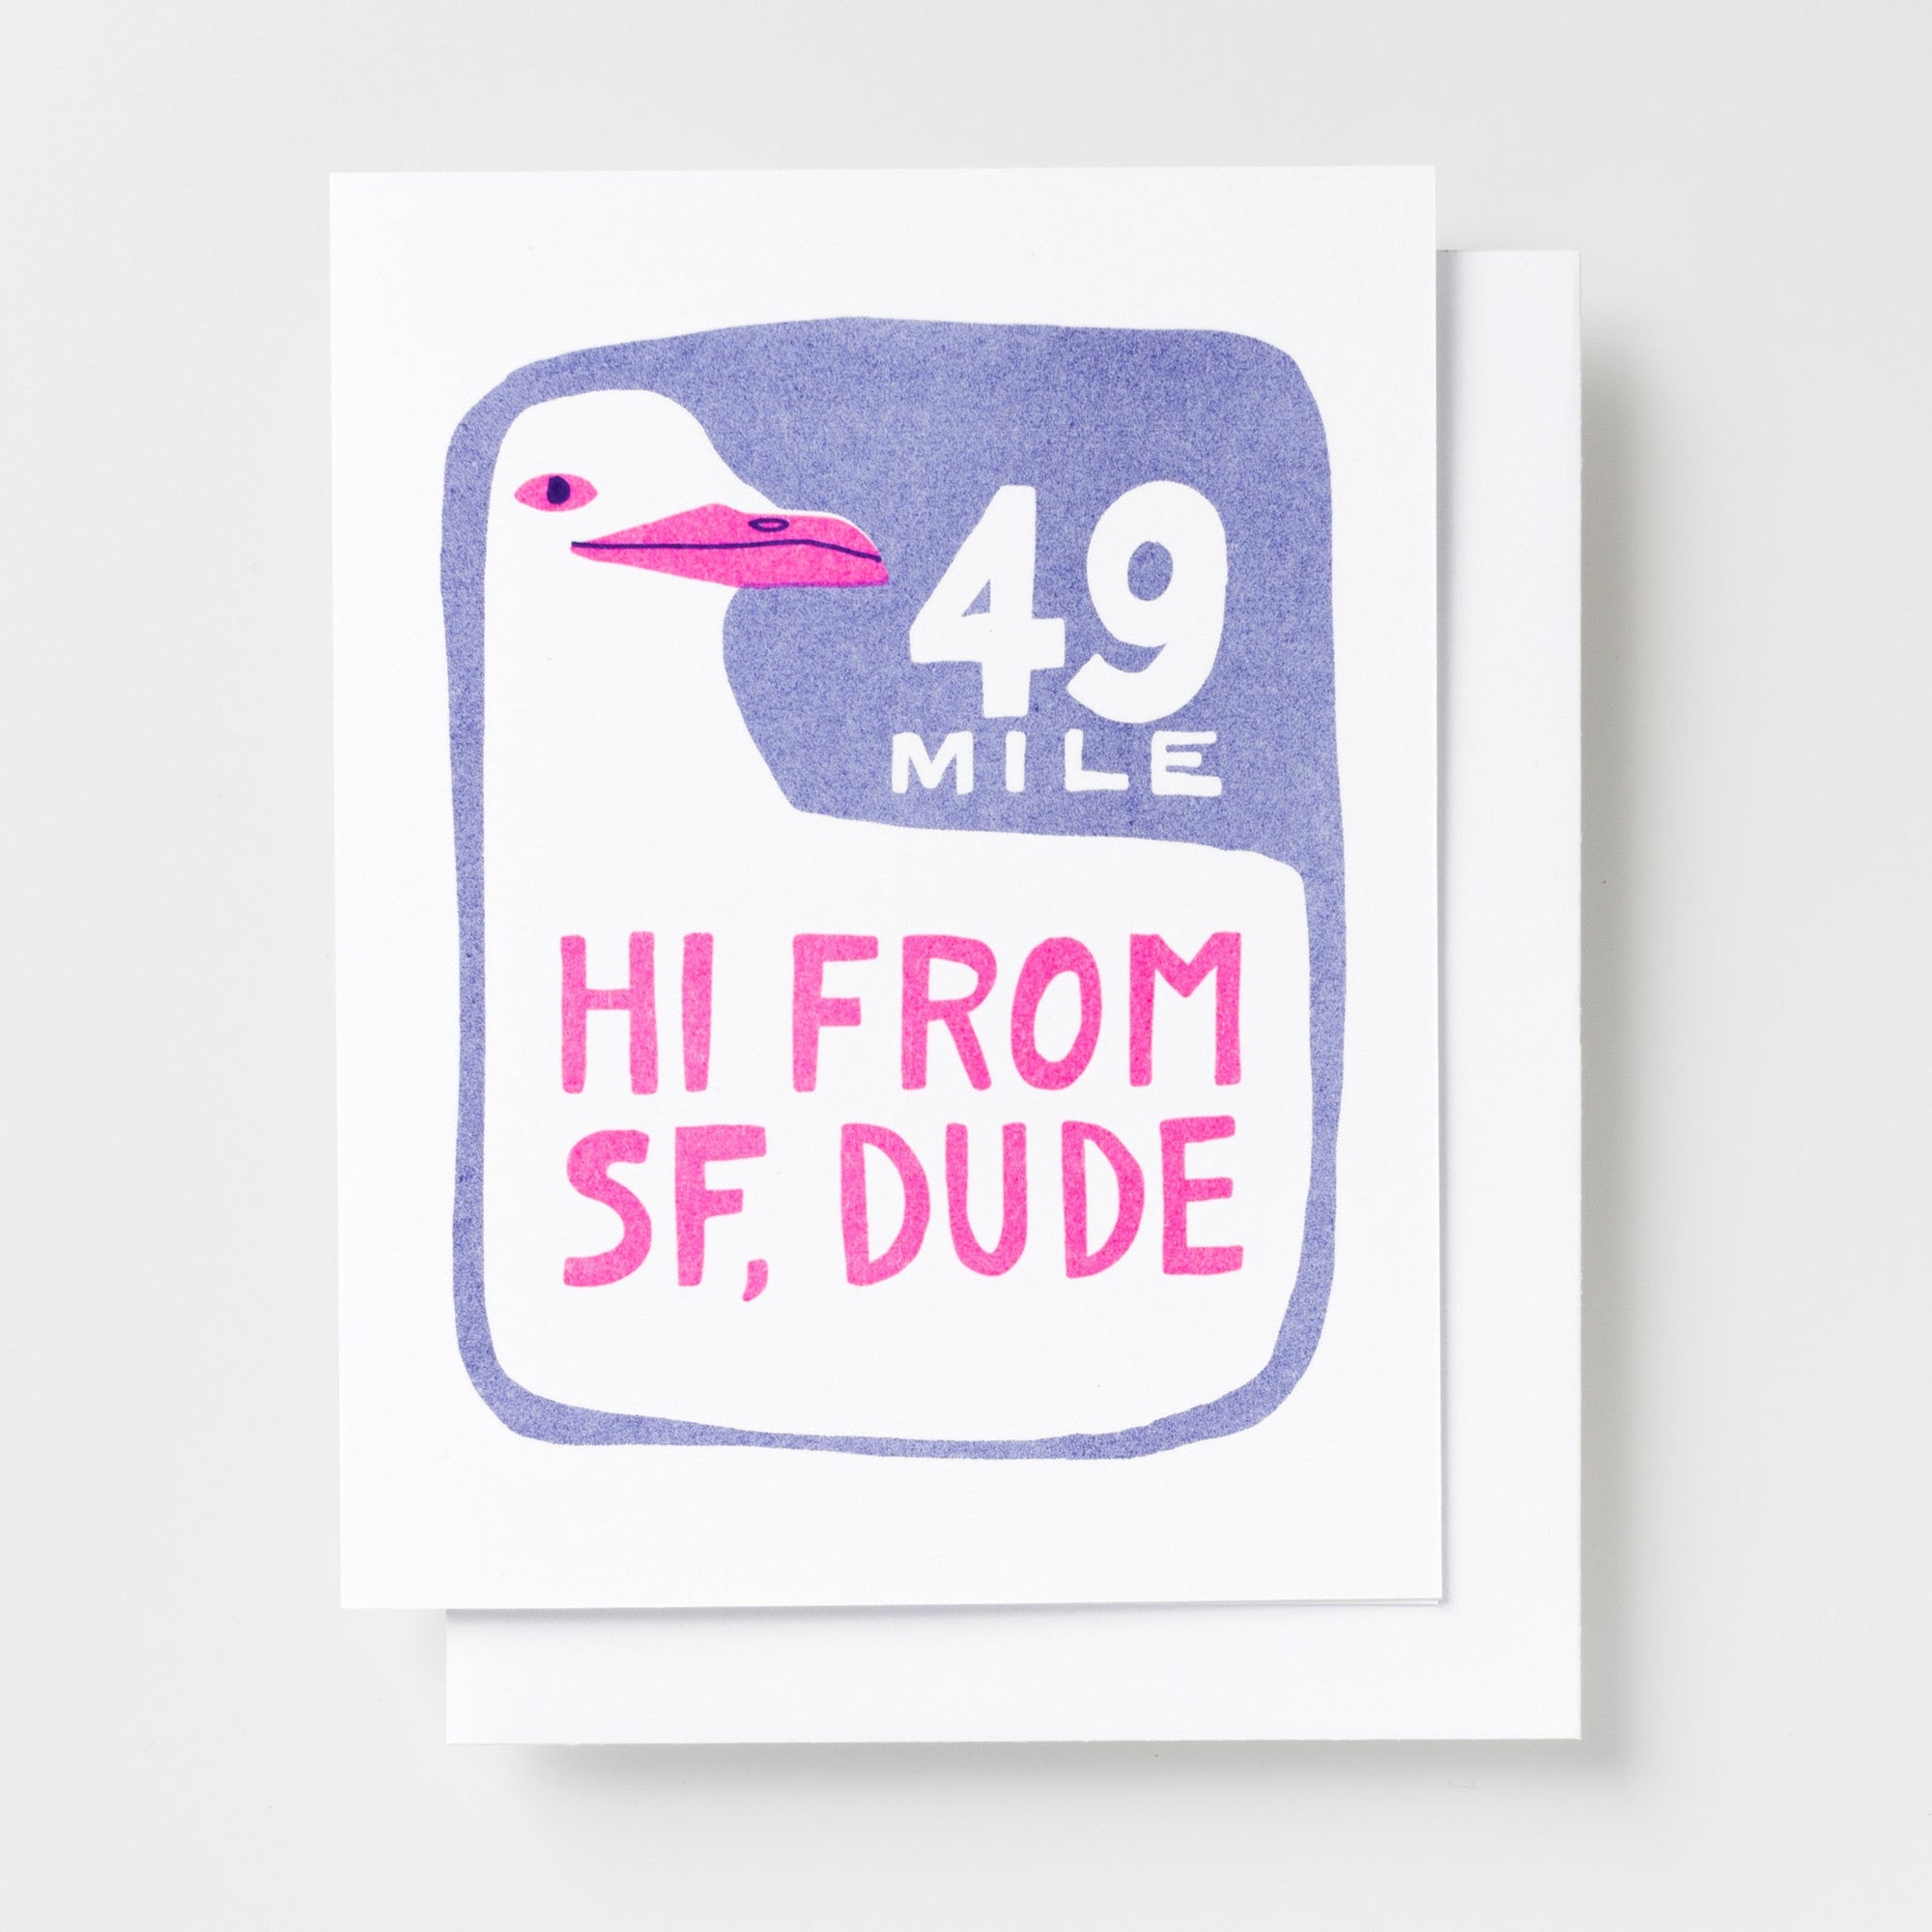 Hi From SF - Risograph Card - Yellow Owl Workshop